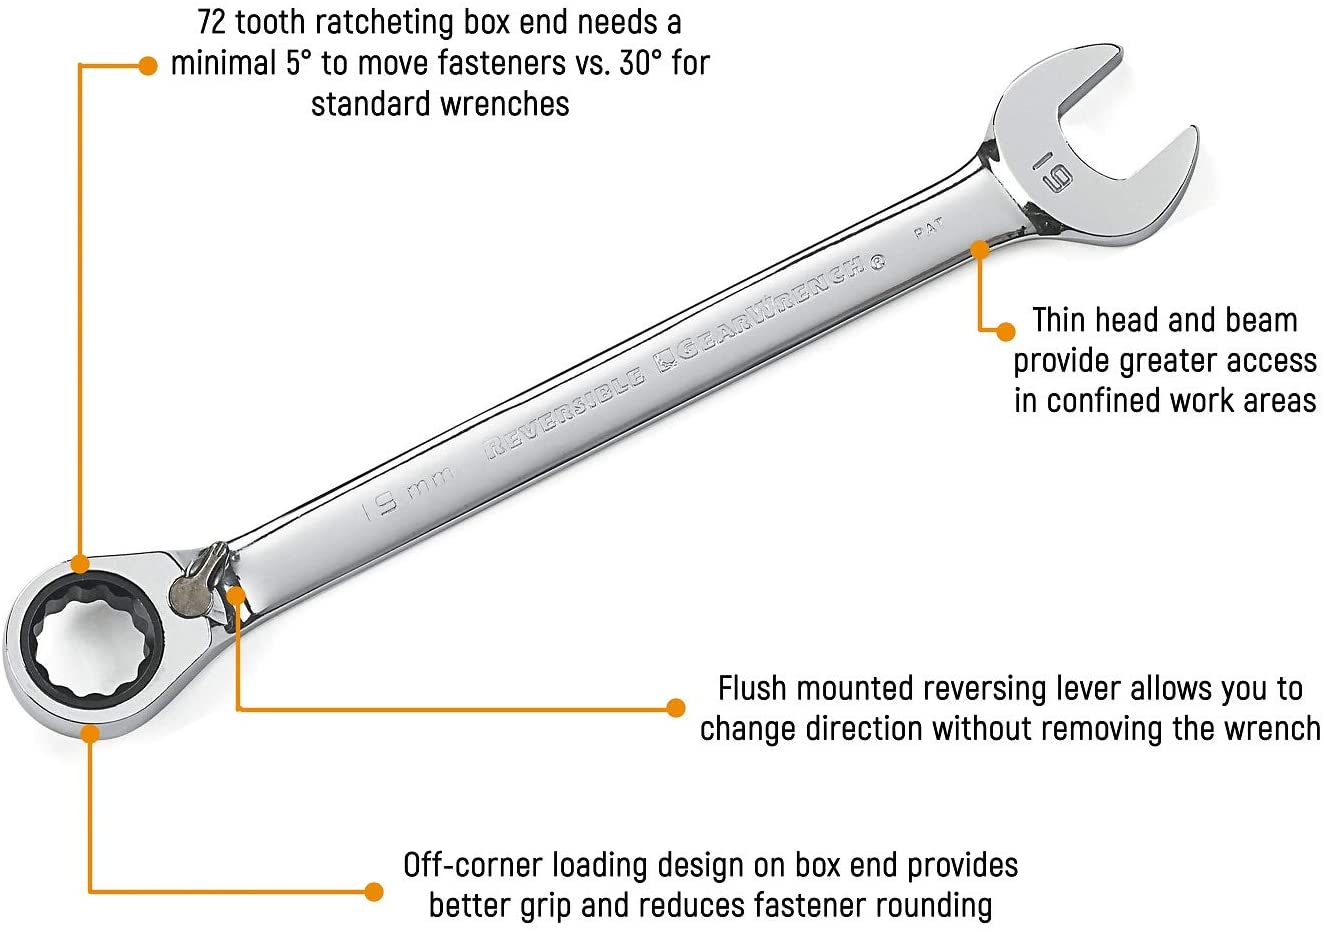 GearWrench 9540 1-Inch Reversible Combination Ratcheting Wrench - MPR Tools & Equipment